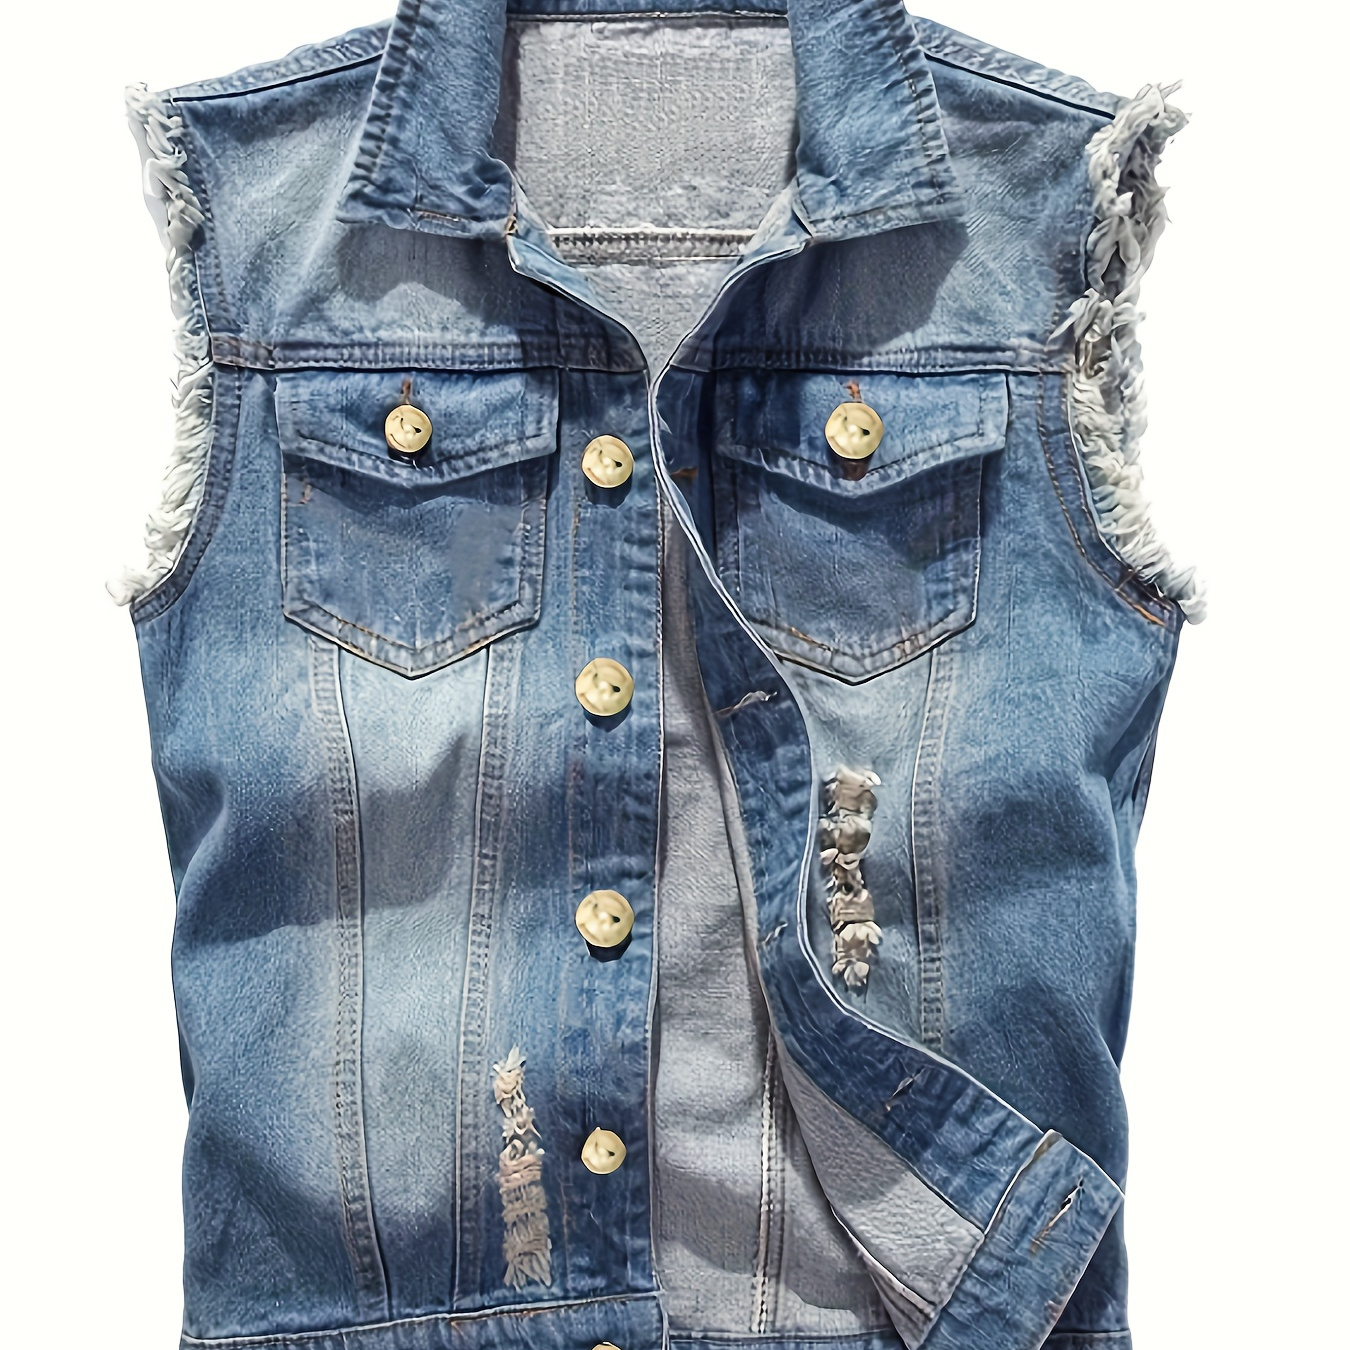 

Men's Casual Button Up Lapel Collar Denim Vest Jacket With Breasted Pockets And Frayed And Distressed Pieces, Trendy And Stylish Tops For Summer Street Wear